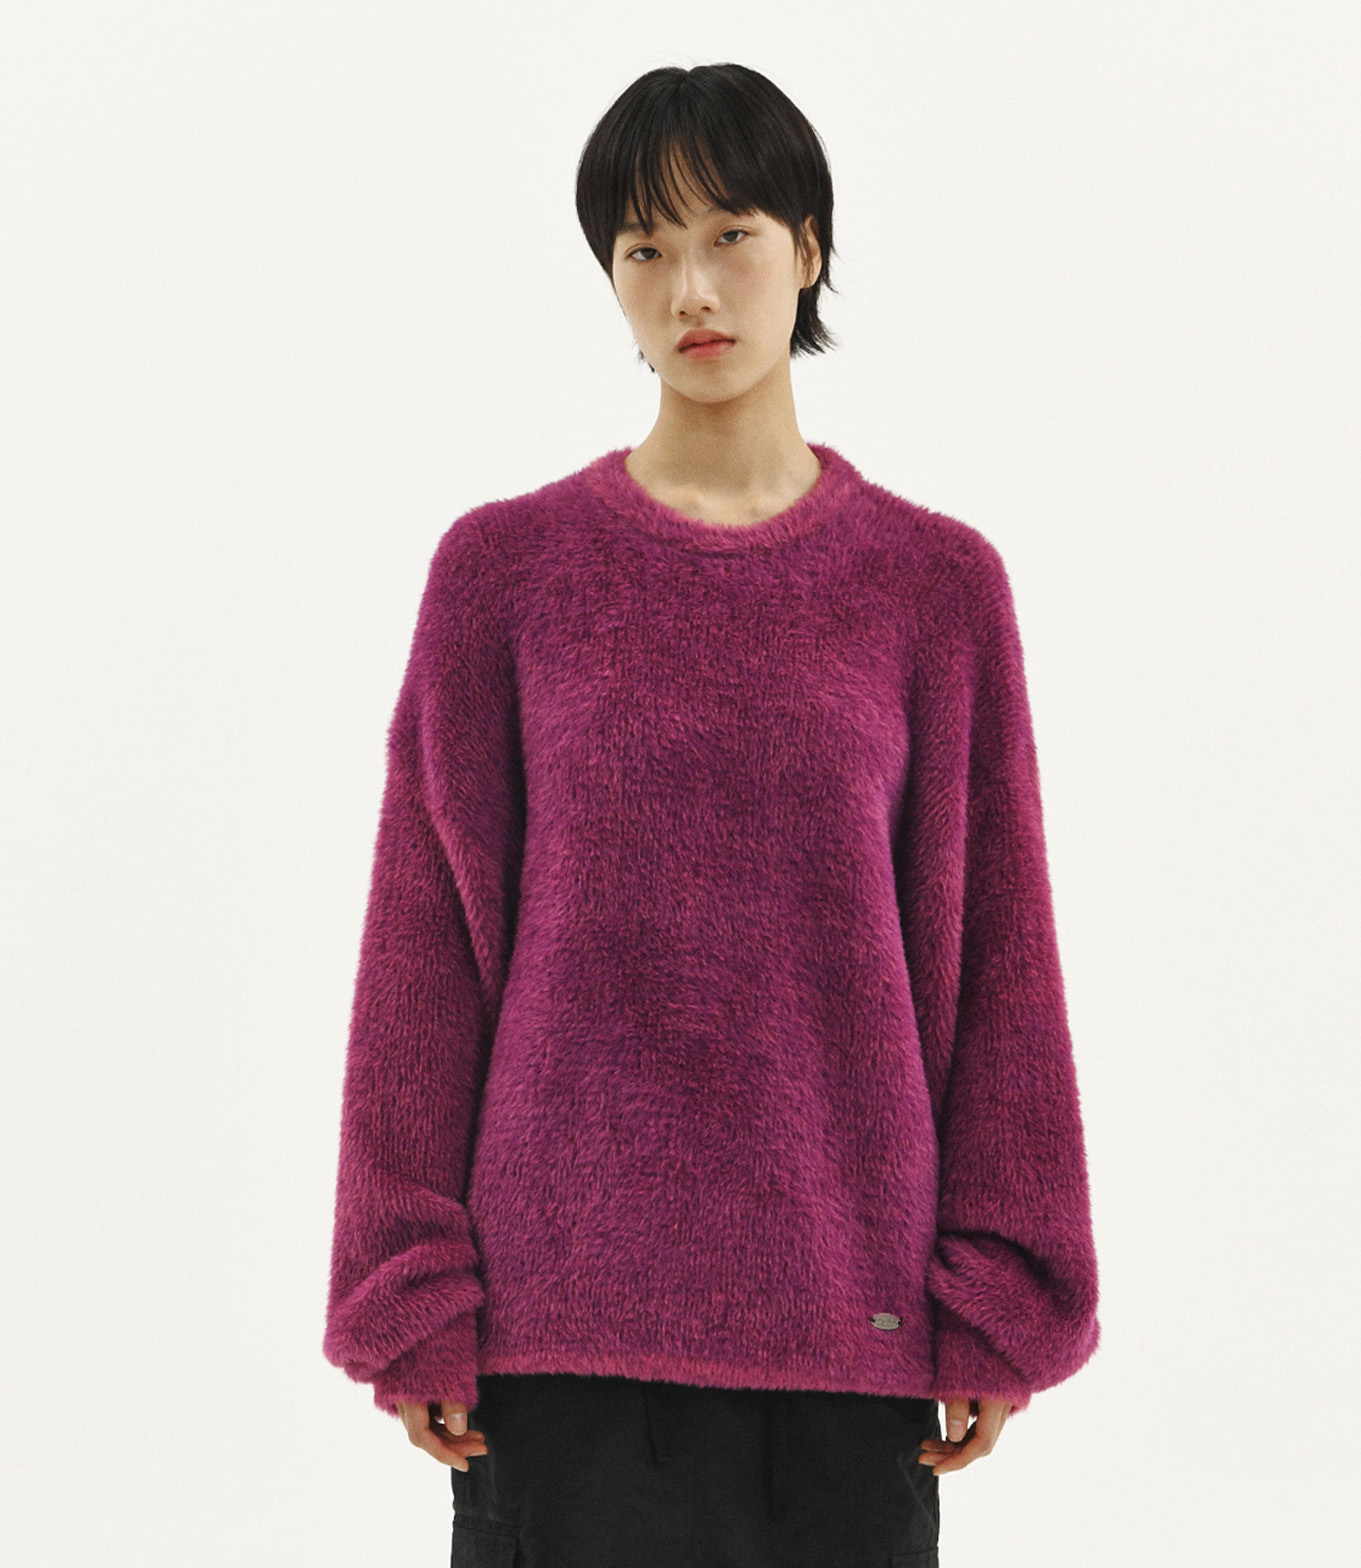 MOHAIR TWO TONE KNIT PURPLE